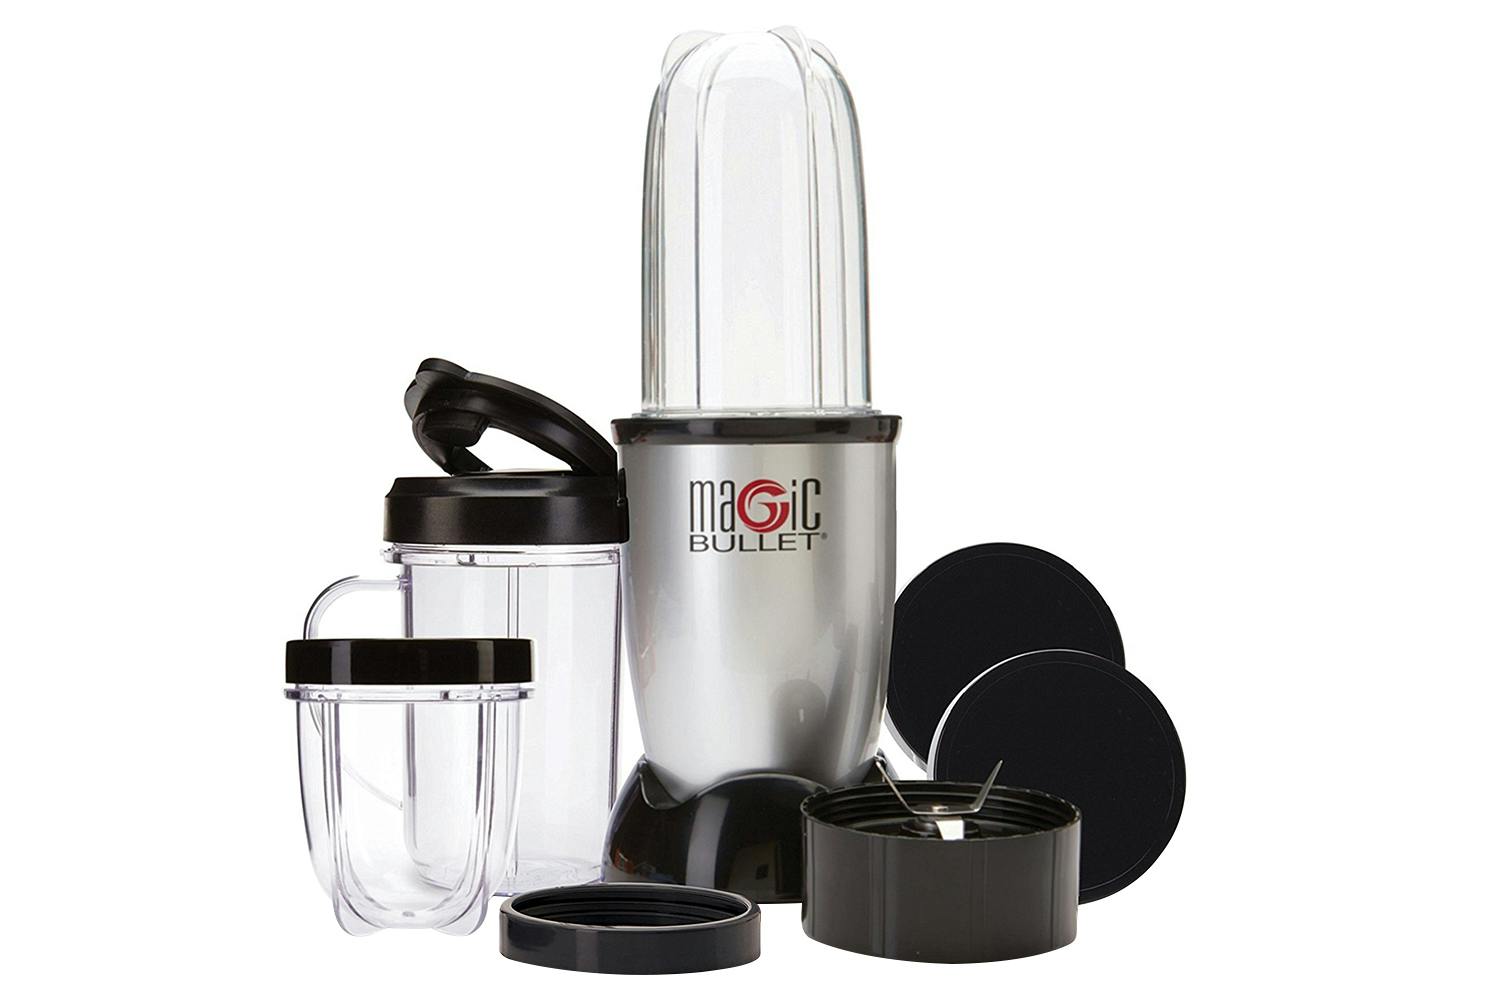 Magic Bullet / Grinder - Why and What I Recommend